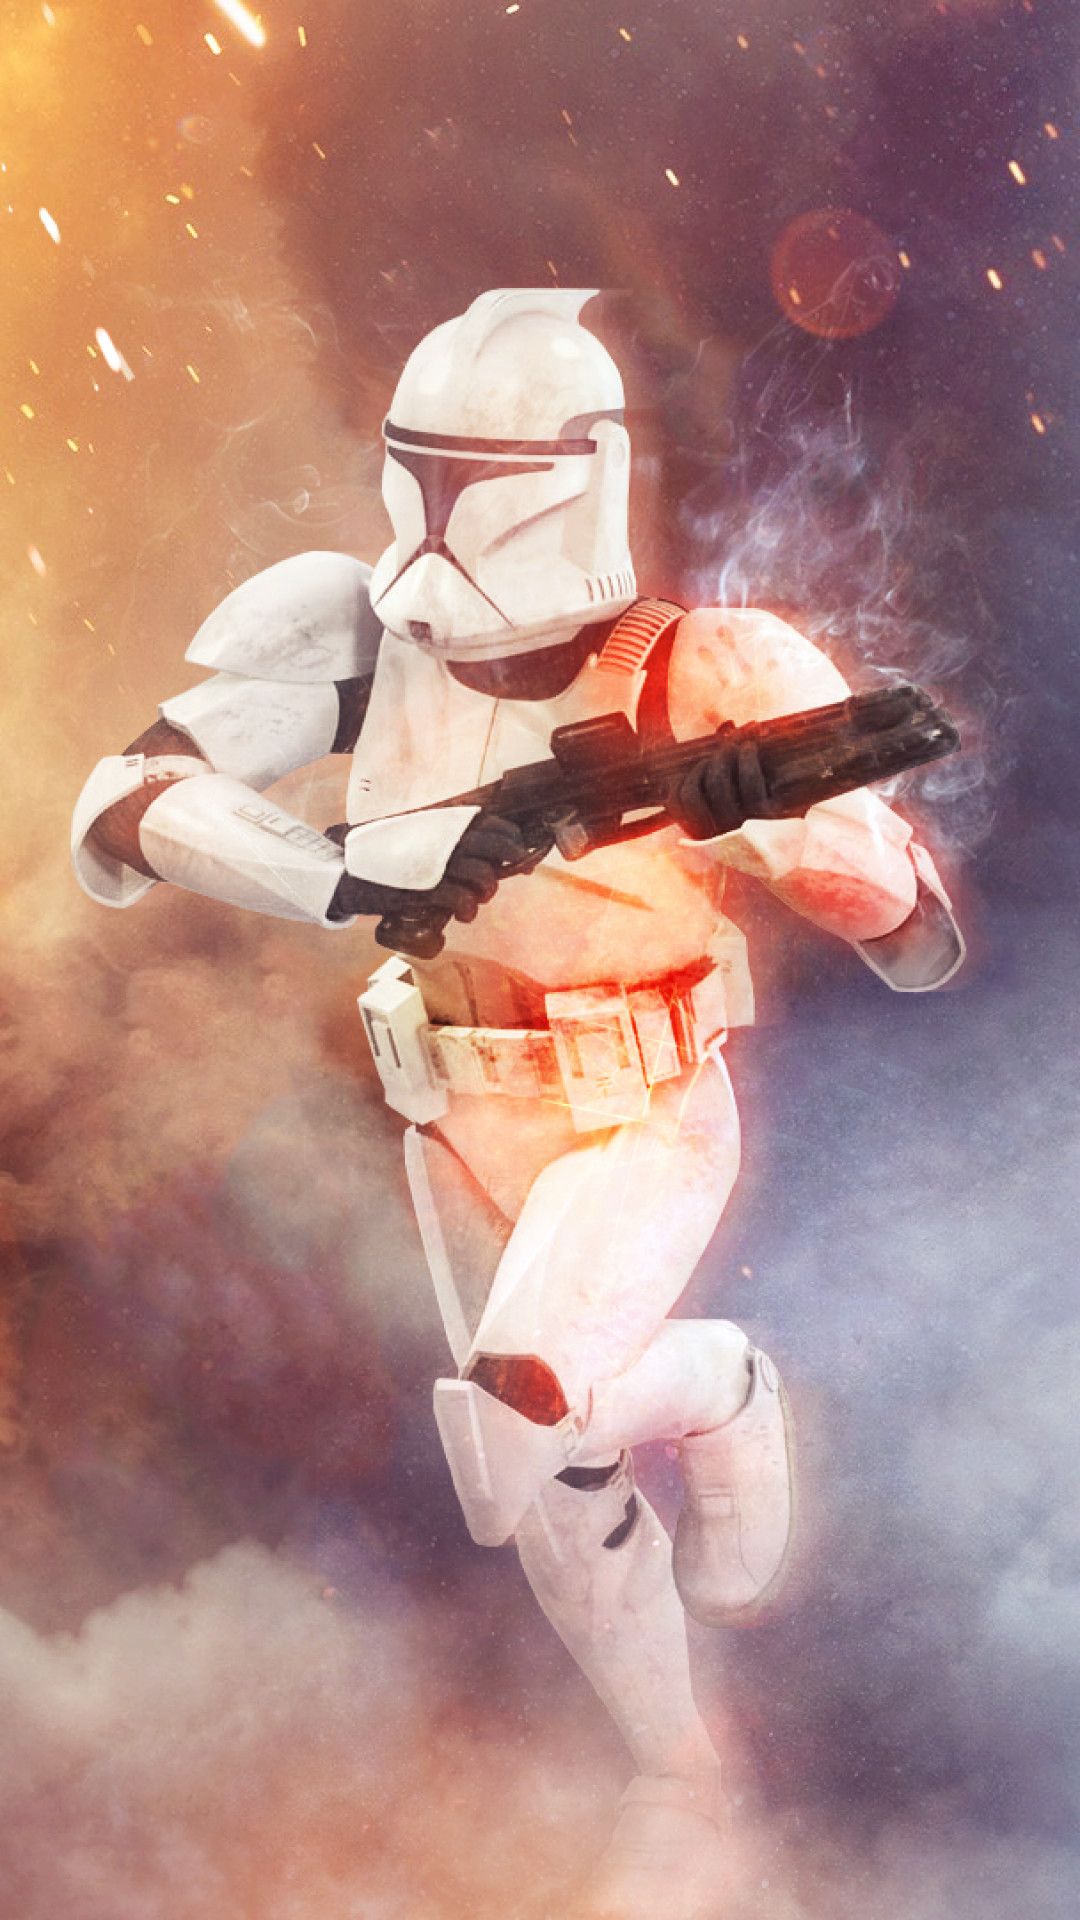 1080x1920 Amazing Backgrounds Of The Day Star Wars Clone Trooper Wallpaper Iphone 1080x1920 Wallpaper Teahub Io